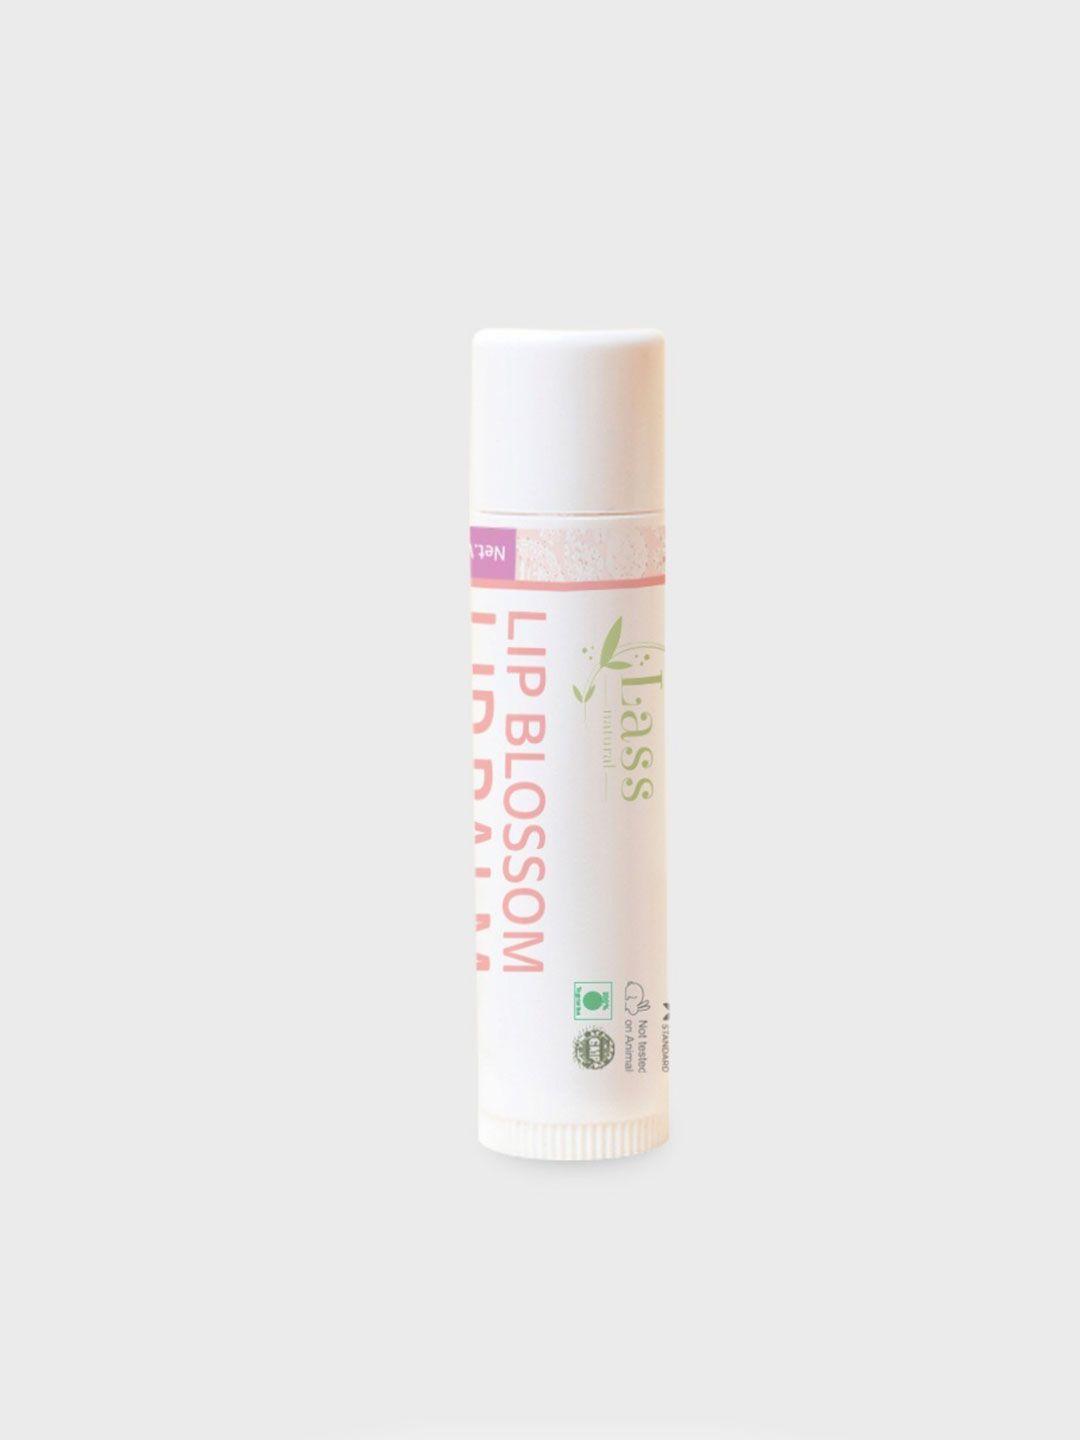 lass naturals herbal lip balm for chapped & cracked lips-8 g - lip blossom